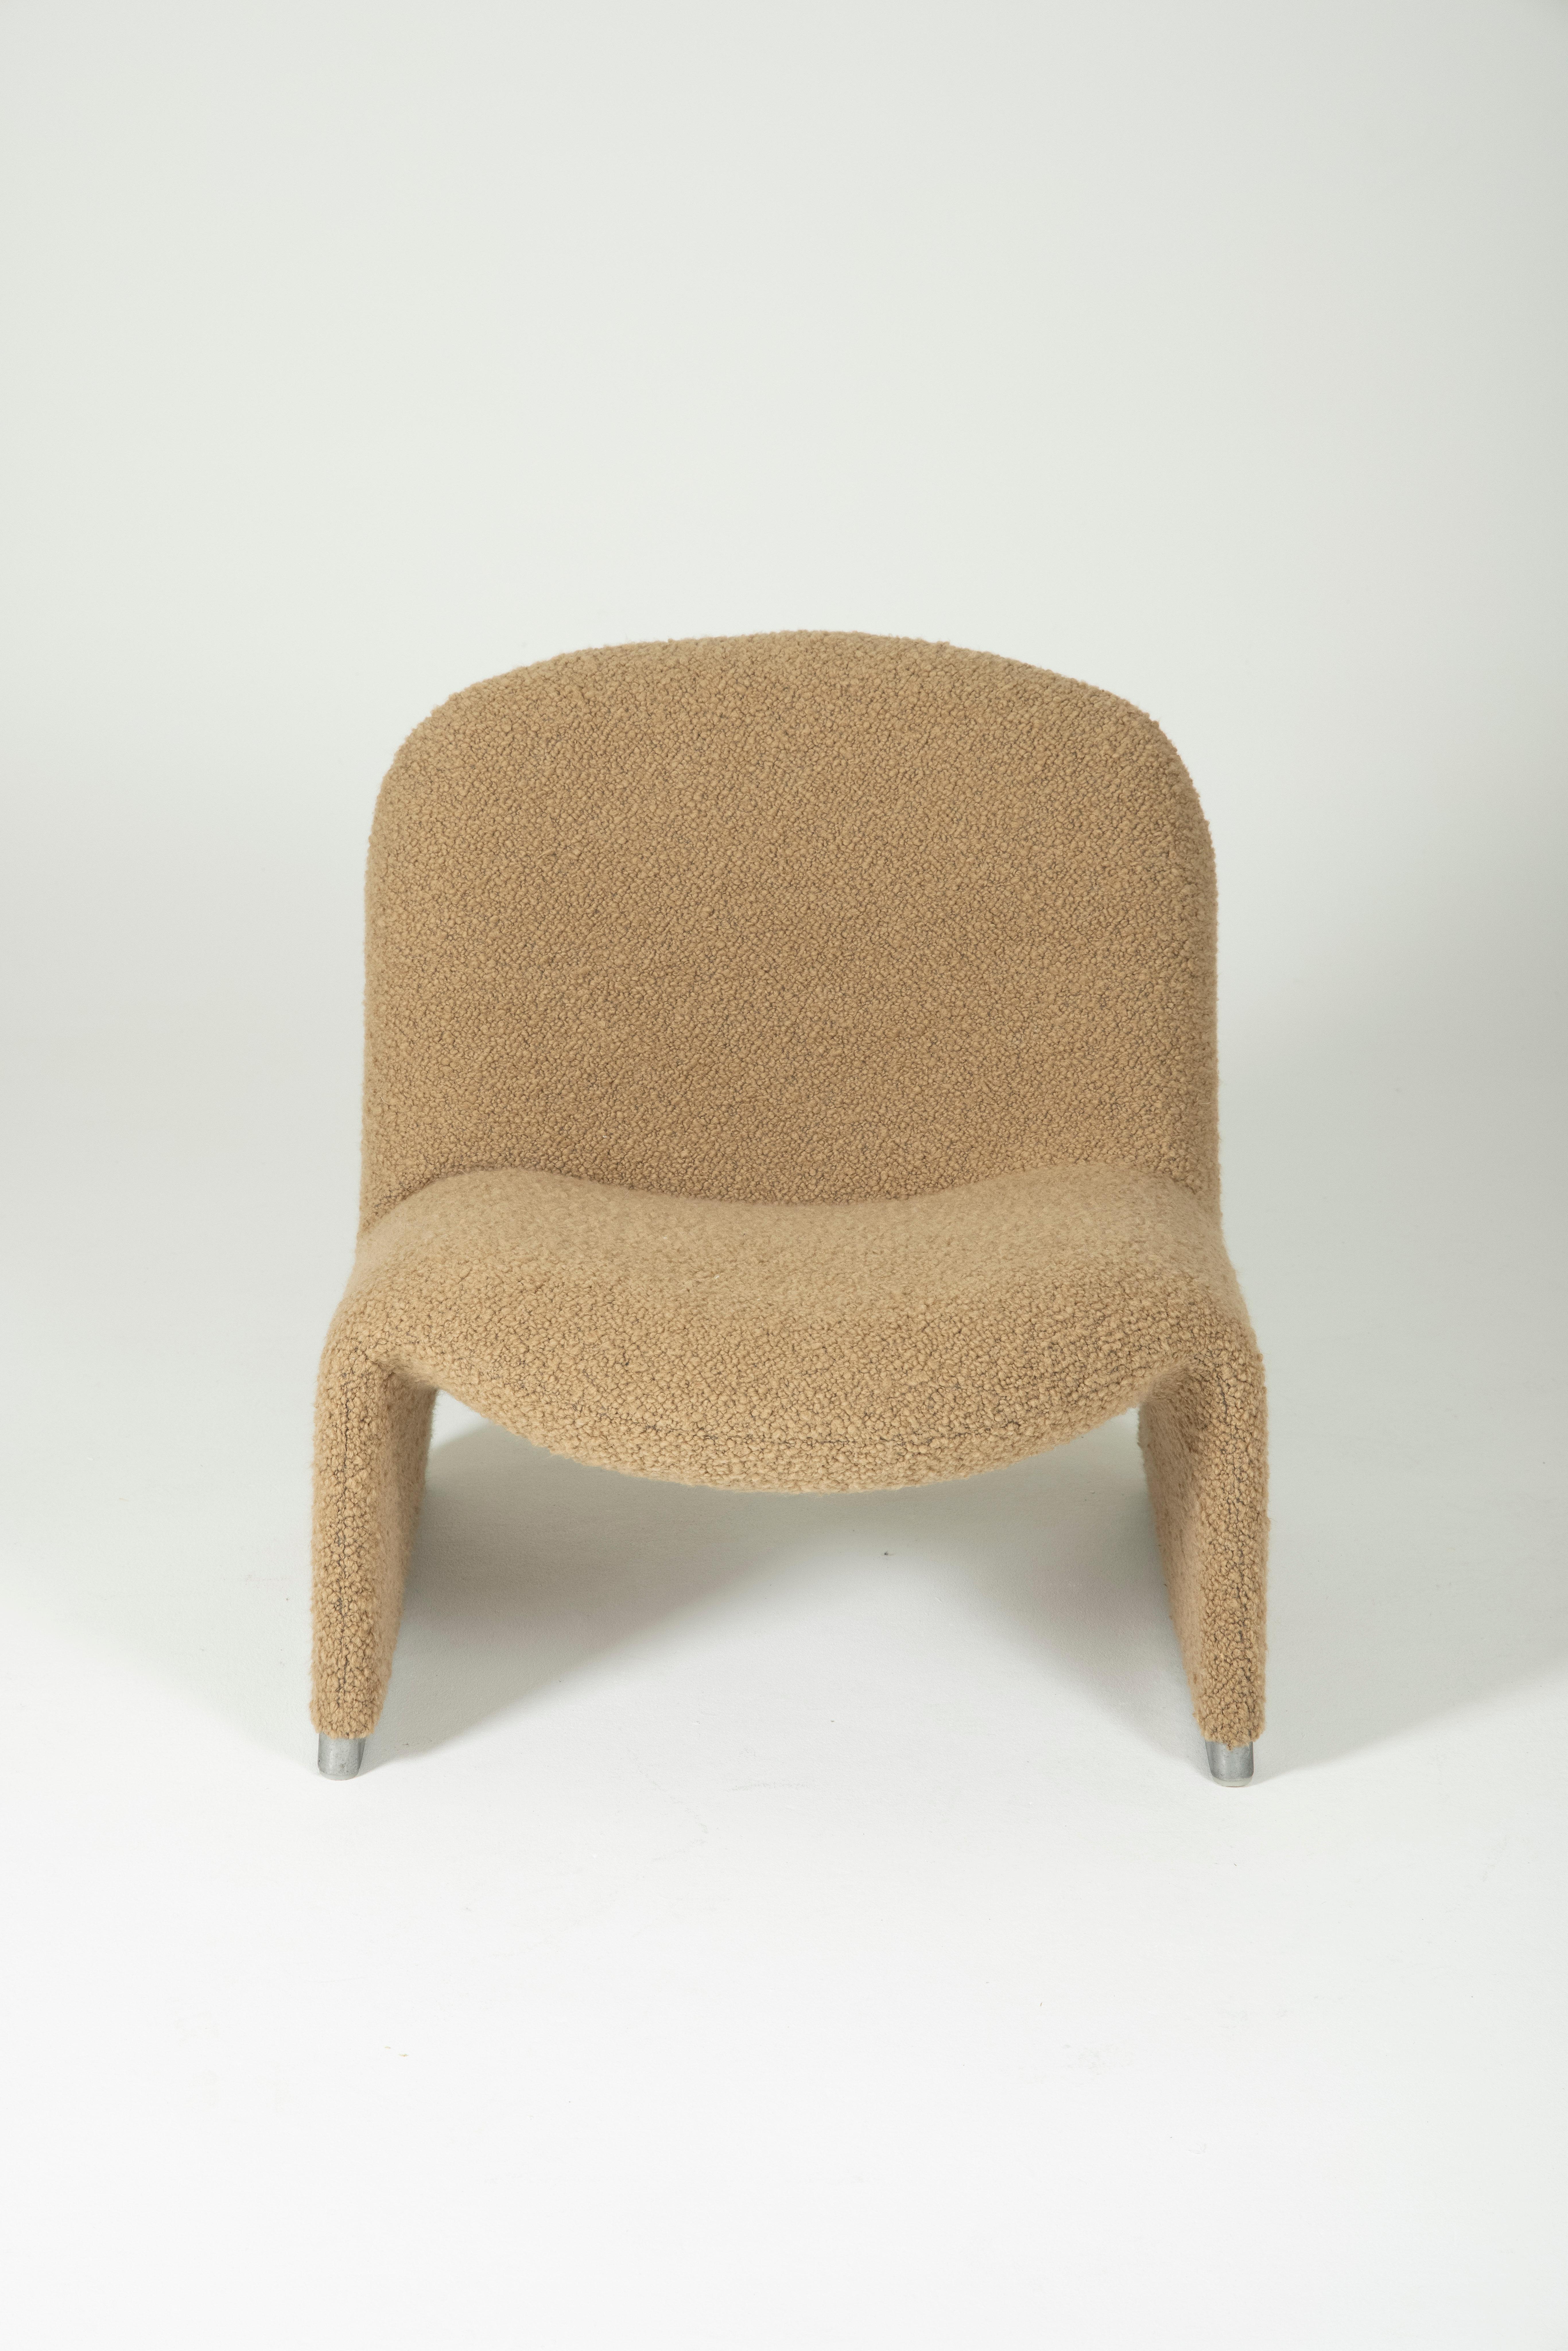 Alky Armchair by Giancarlo Piretti In Excellent Condition For Sale In PARIS, FR